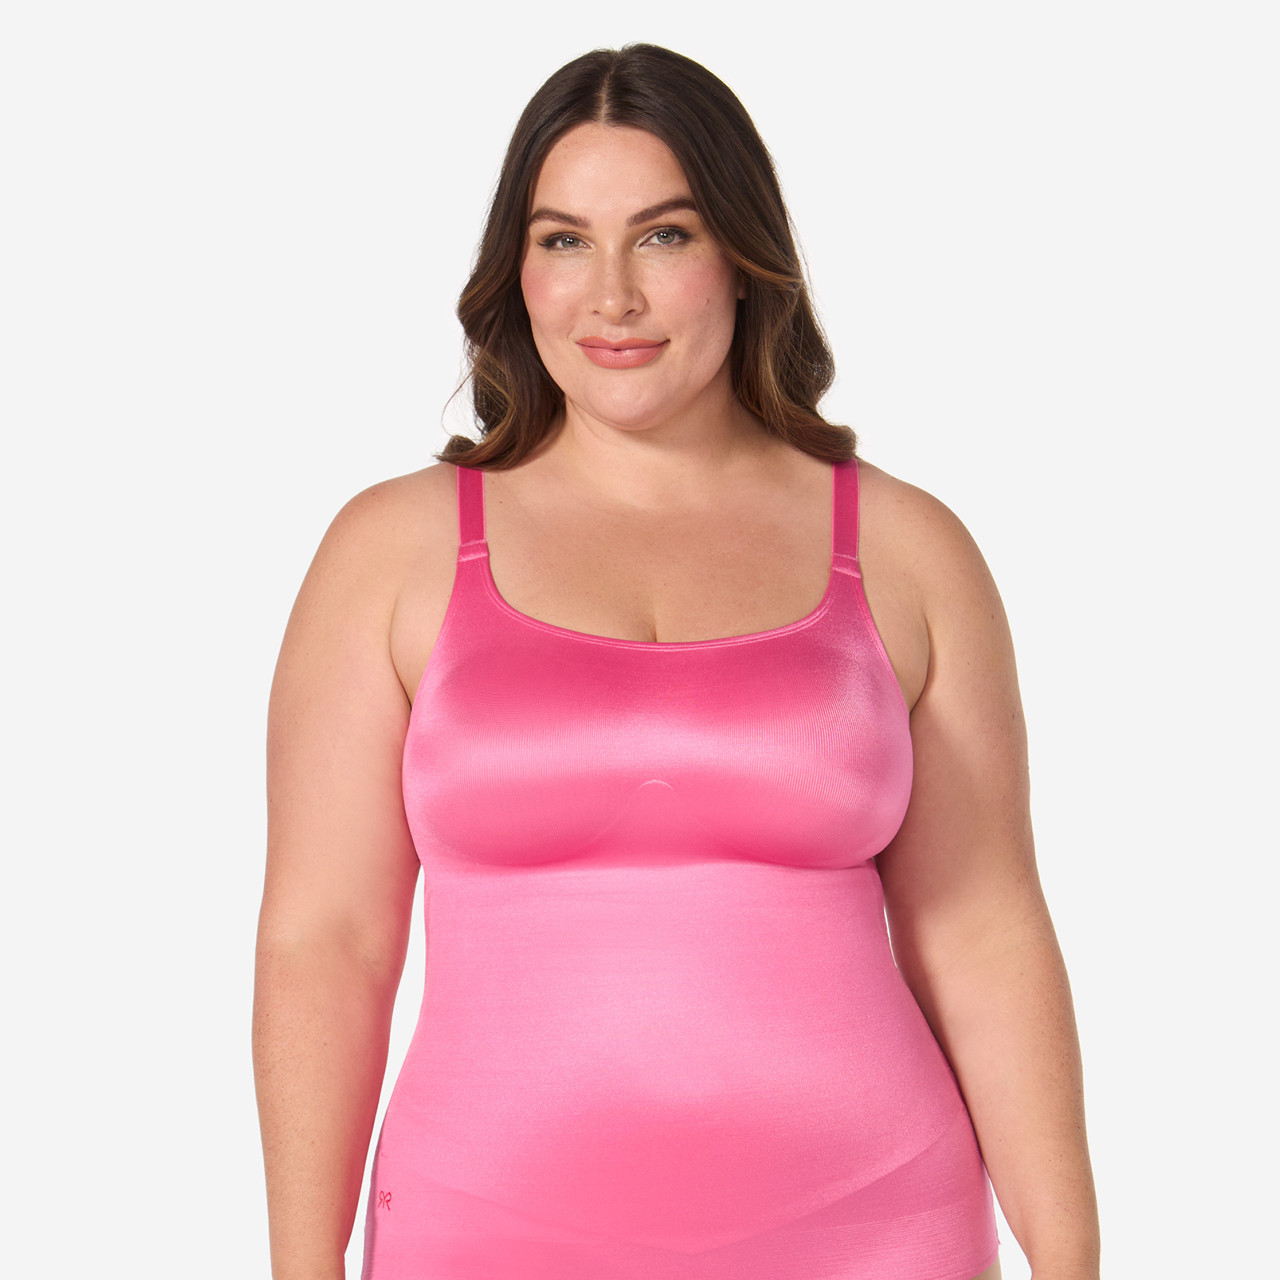 Camis & Demiettes® - Support Levels - Level 5 Maximum Support & Compression  - Ruby Ribbon, Inc.